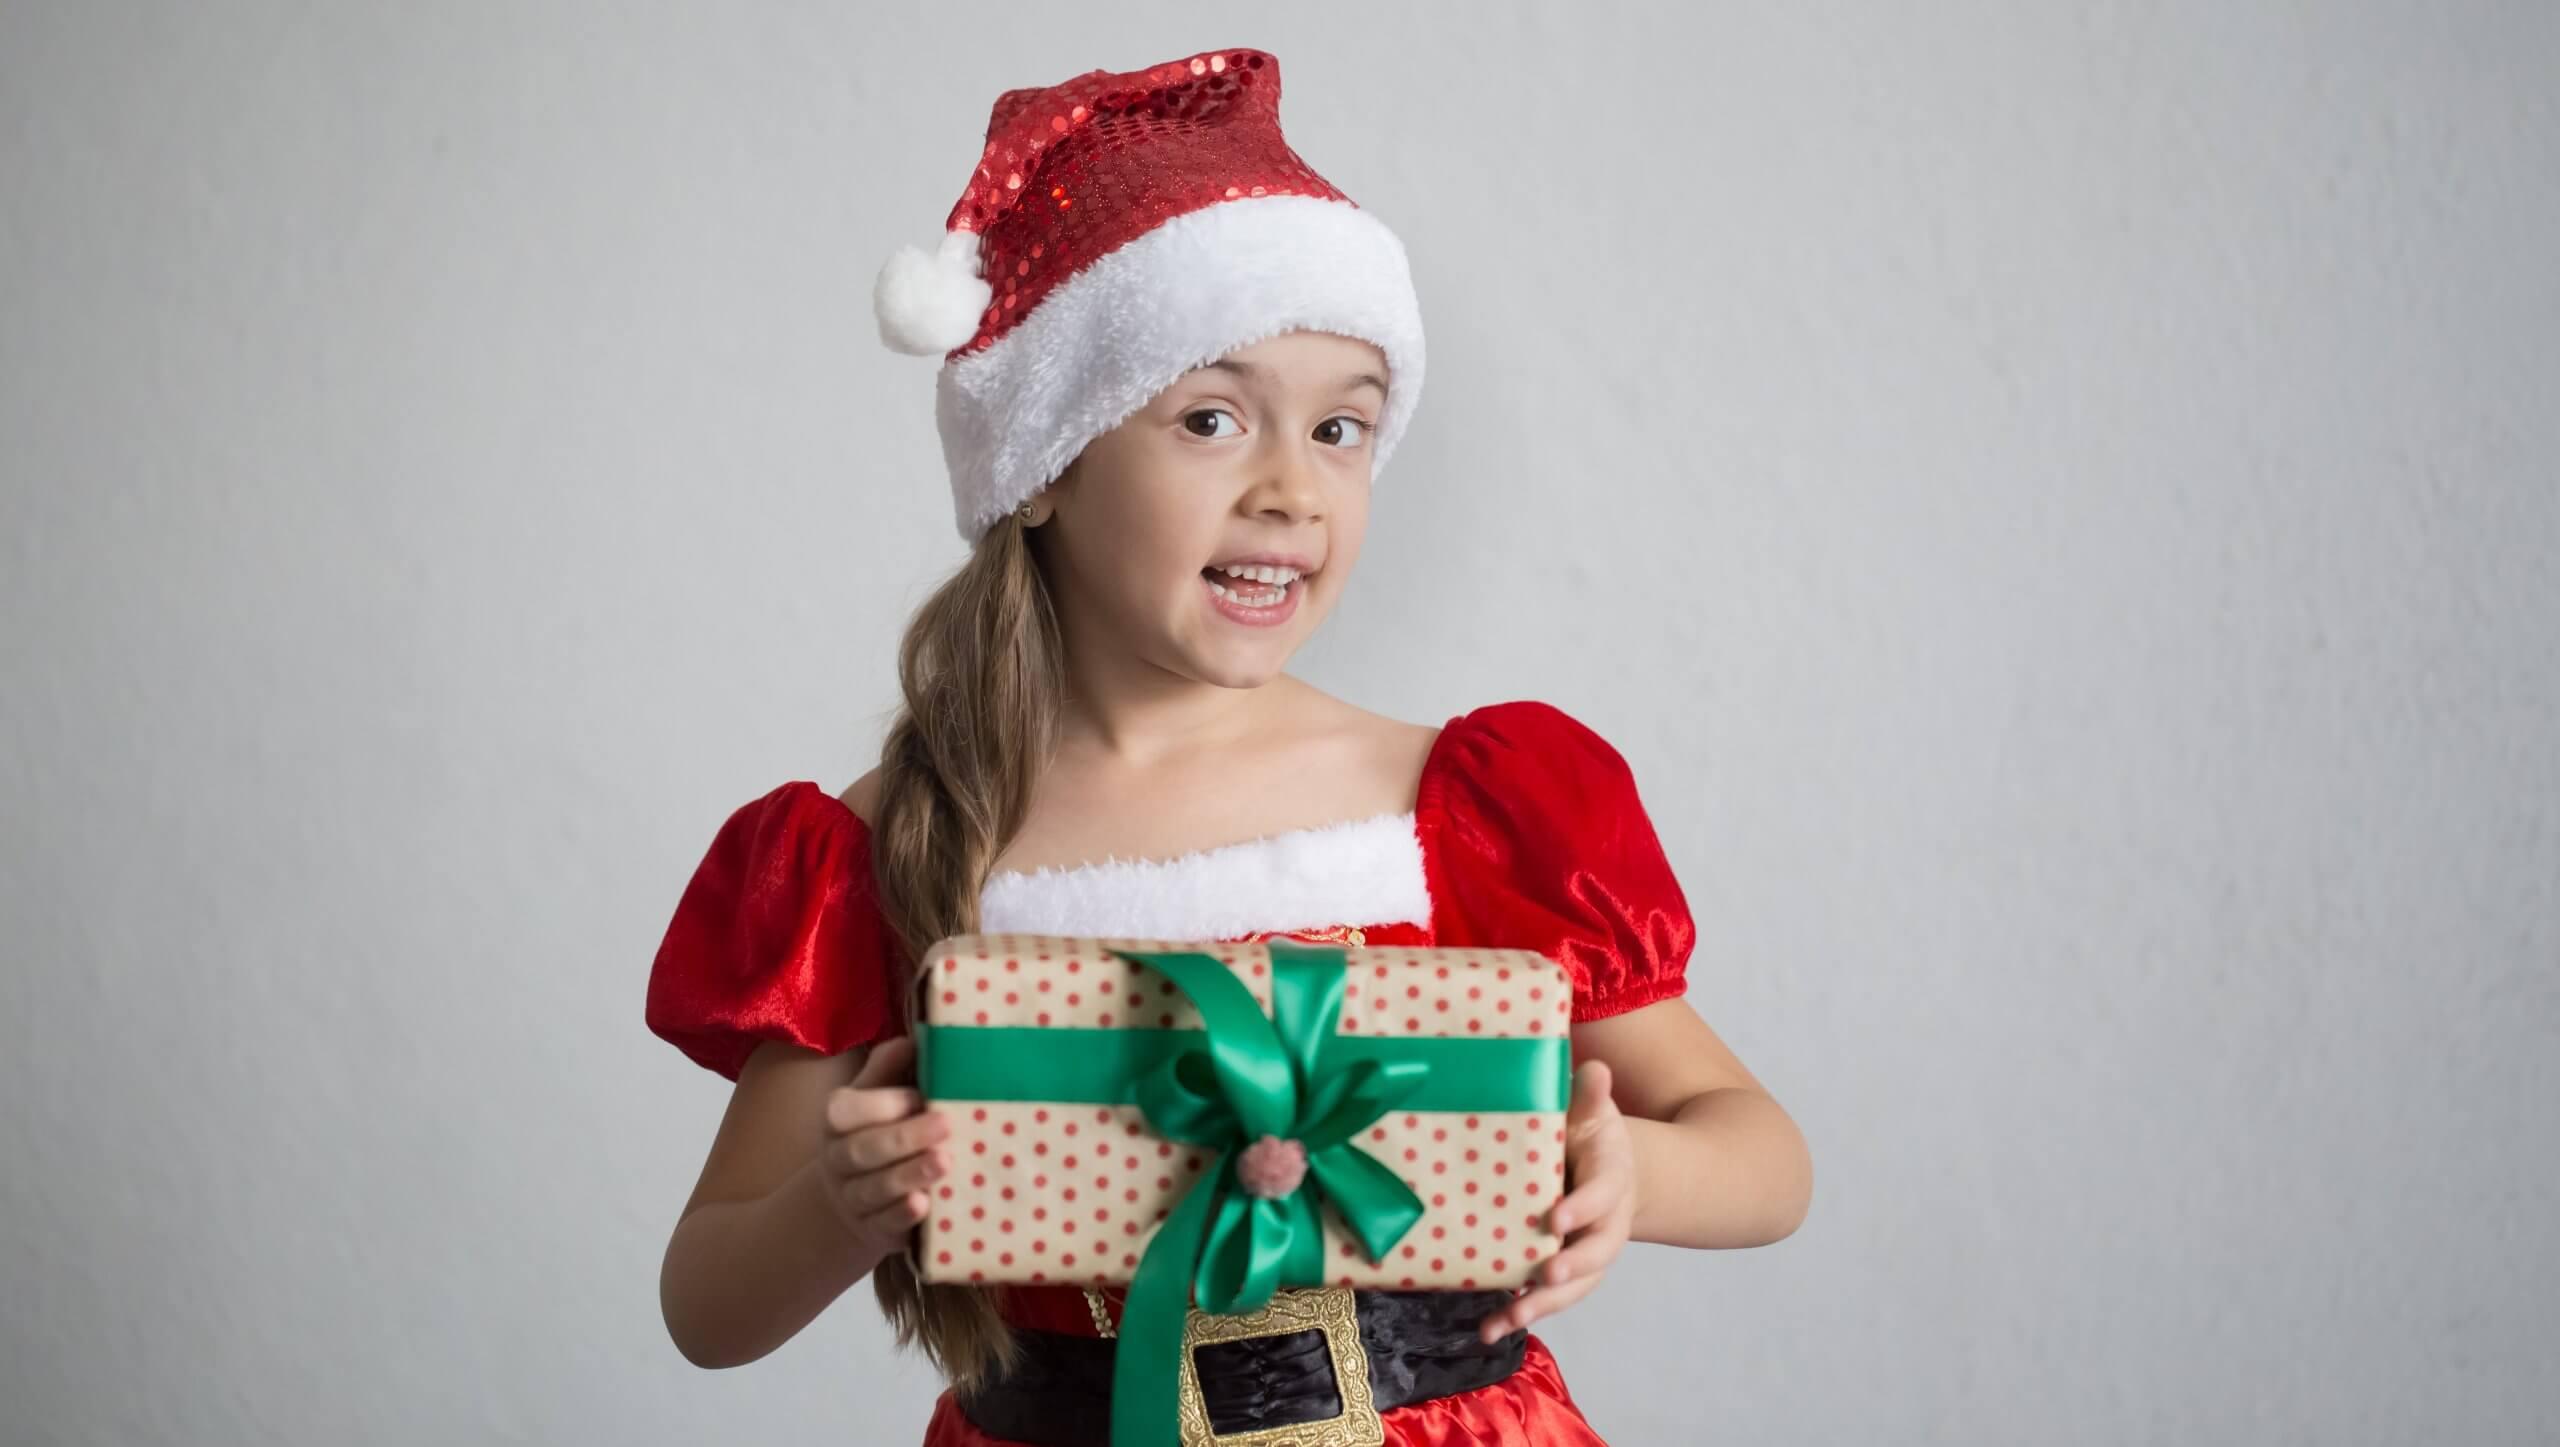 Kids and Gifts: How Many Gifts is Too Many?